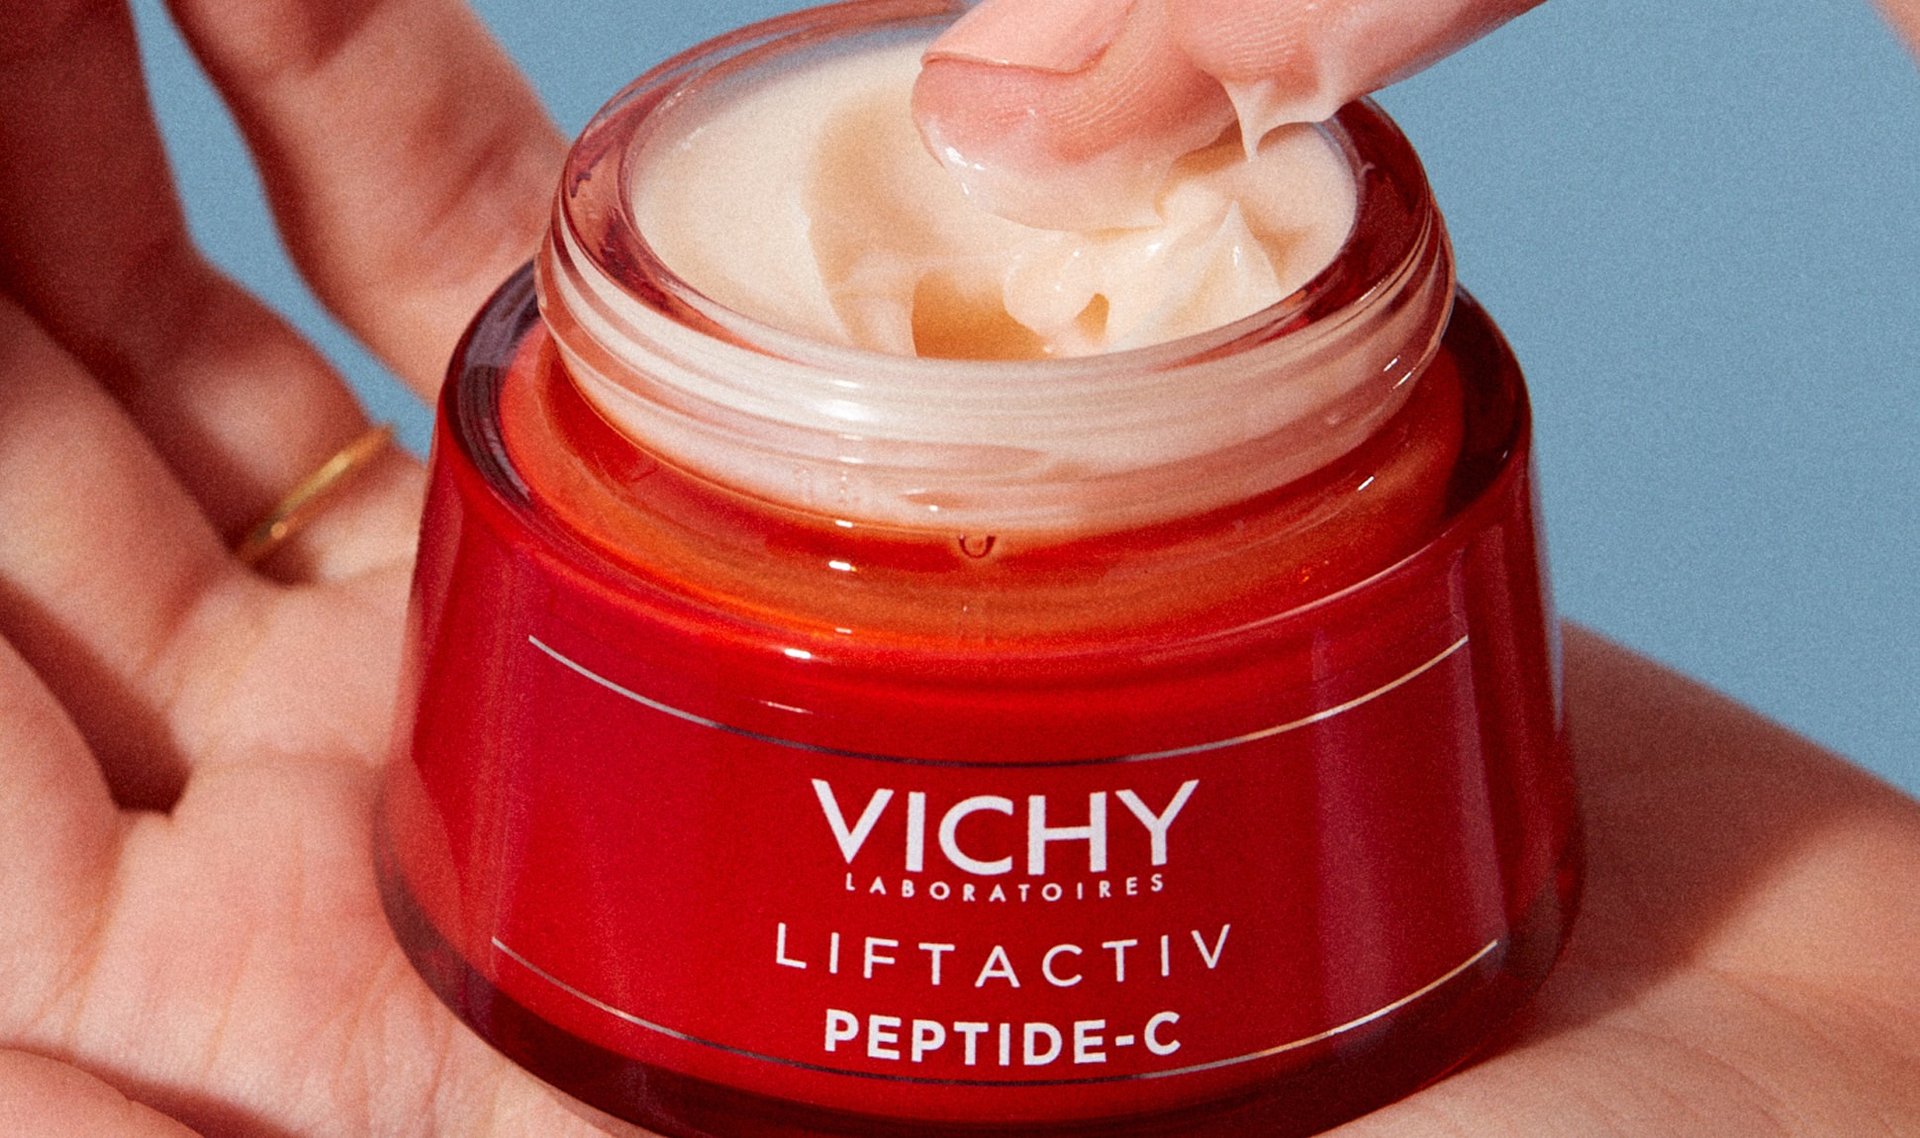 A Definitive Guide to Vichy Moisturizers